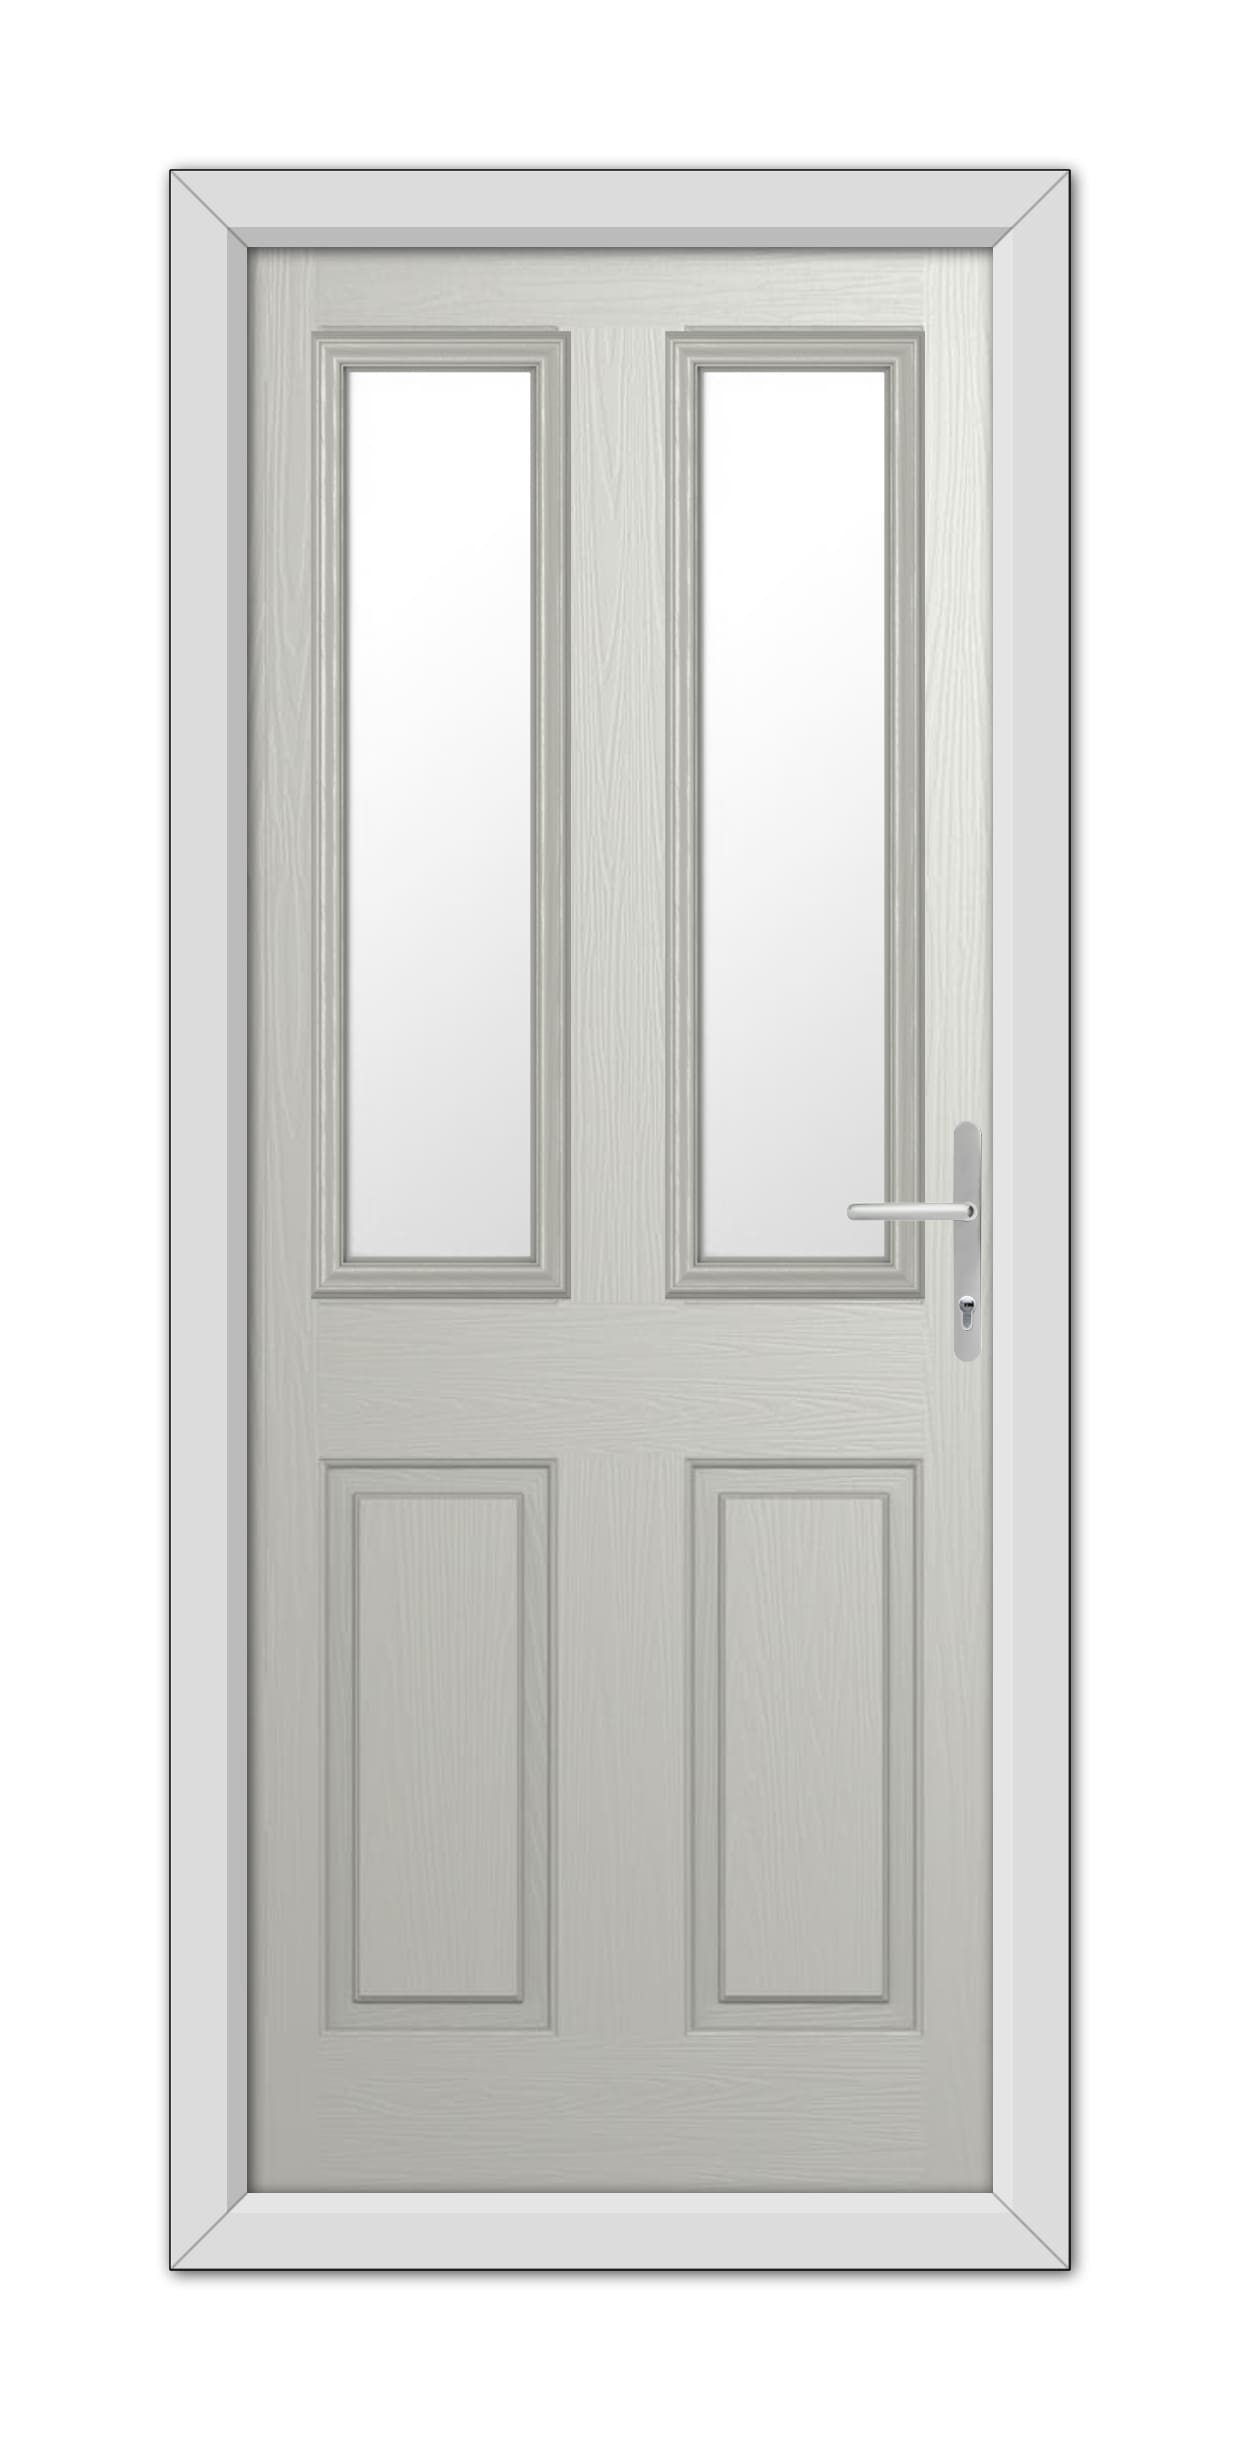 A modern Agate Grey Whitmore Composite Door 48mm Timber Core with two vertical glass panels and a chrome handle, set within a white frame.